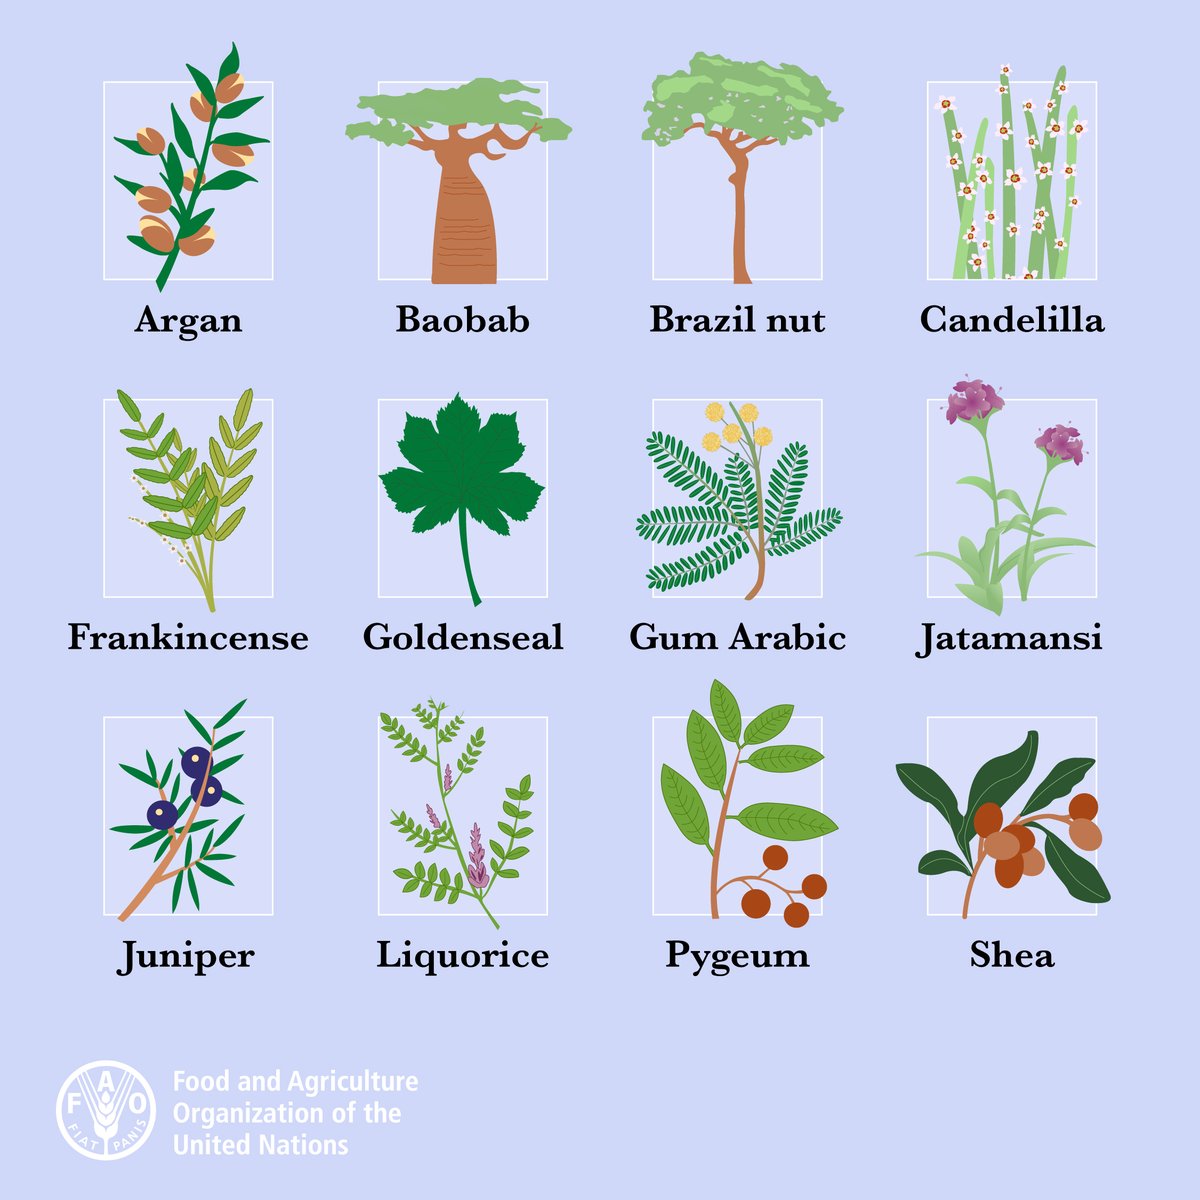 Plant blindness has left initiatives that promote sustainable plant use & conservation lagging behind. But plants, especially wild-harvested ones, are vital to our everyday lives. How @FAO is protecting 12 plants hidden in plain sight: fao.org/documents/card…